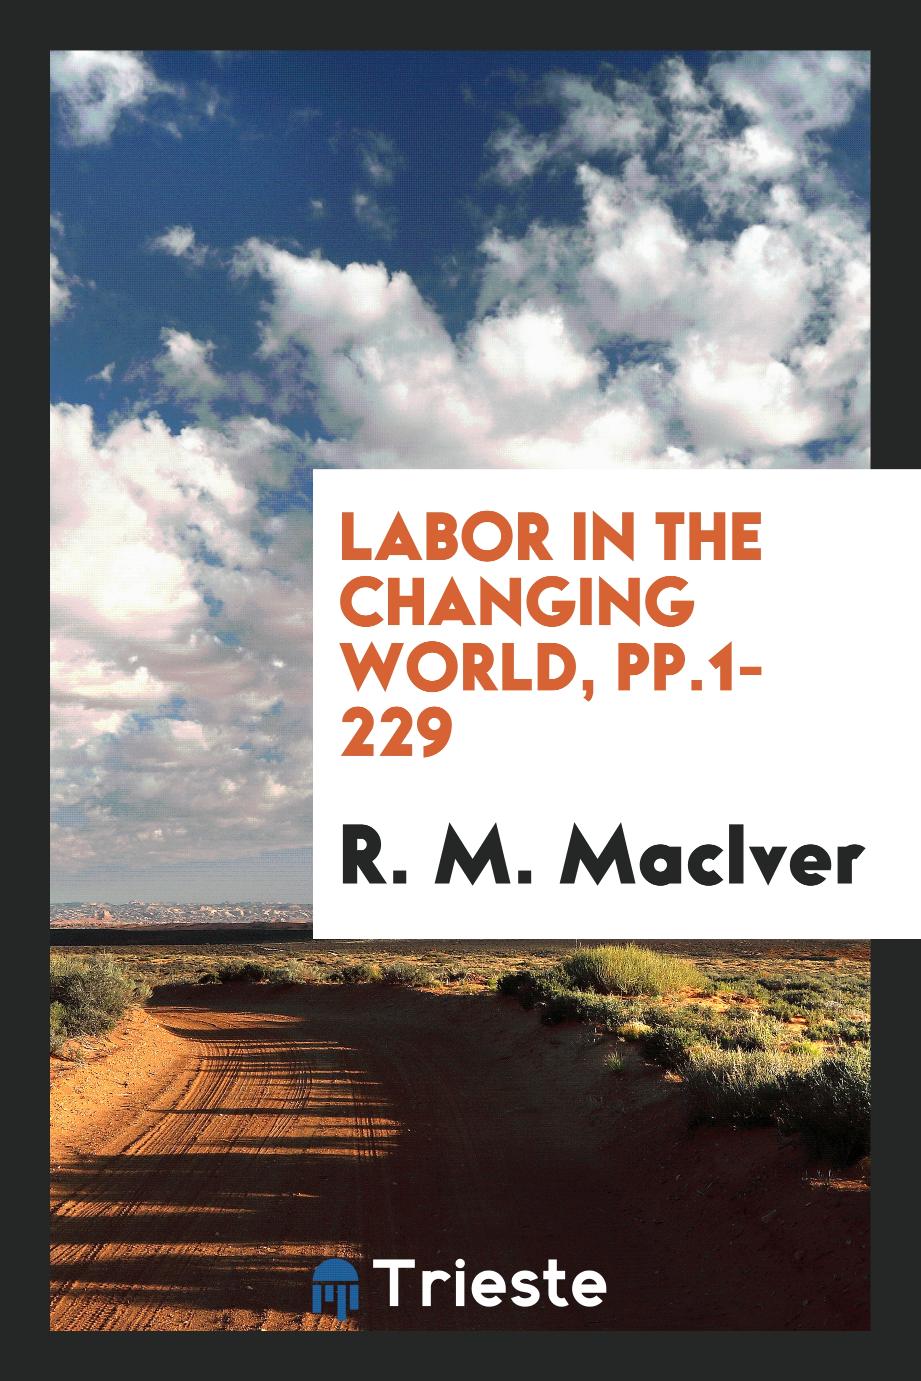 Labor in the Changing World, pp.1-229